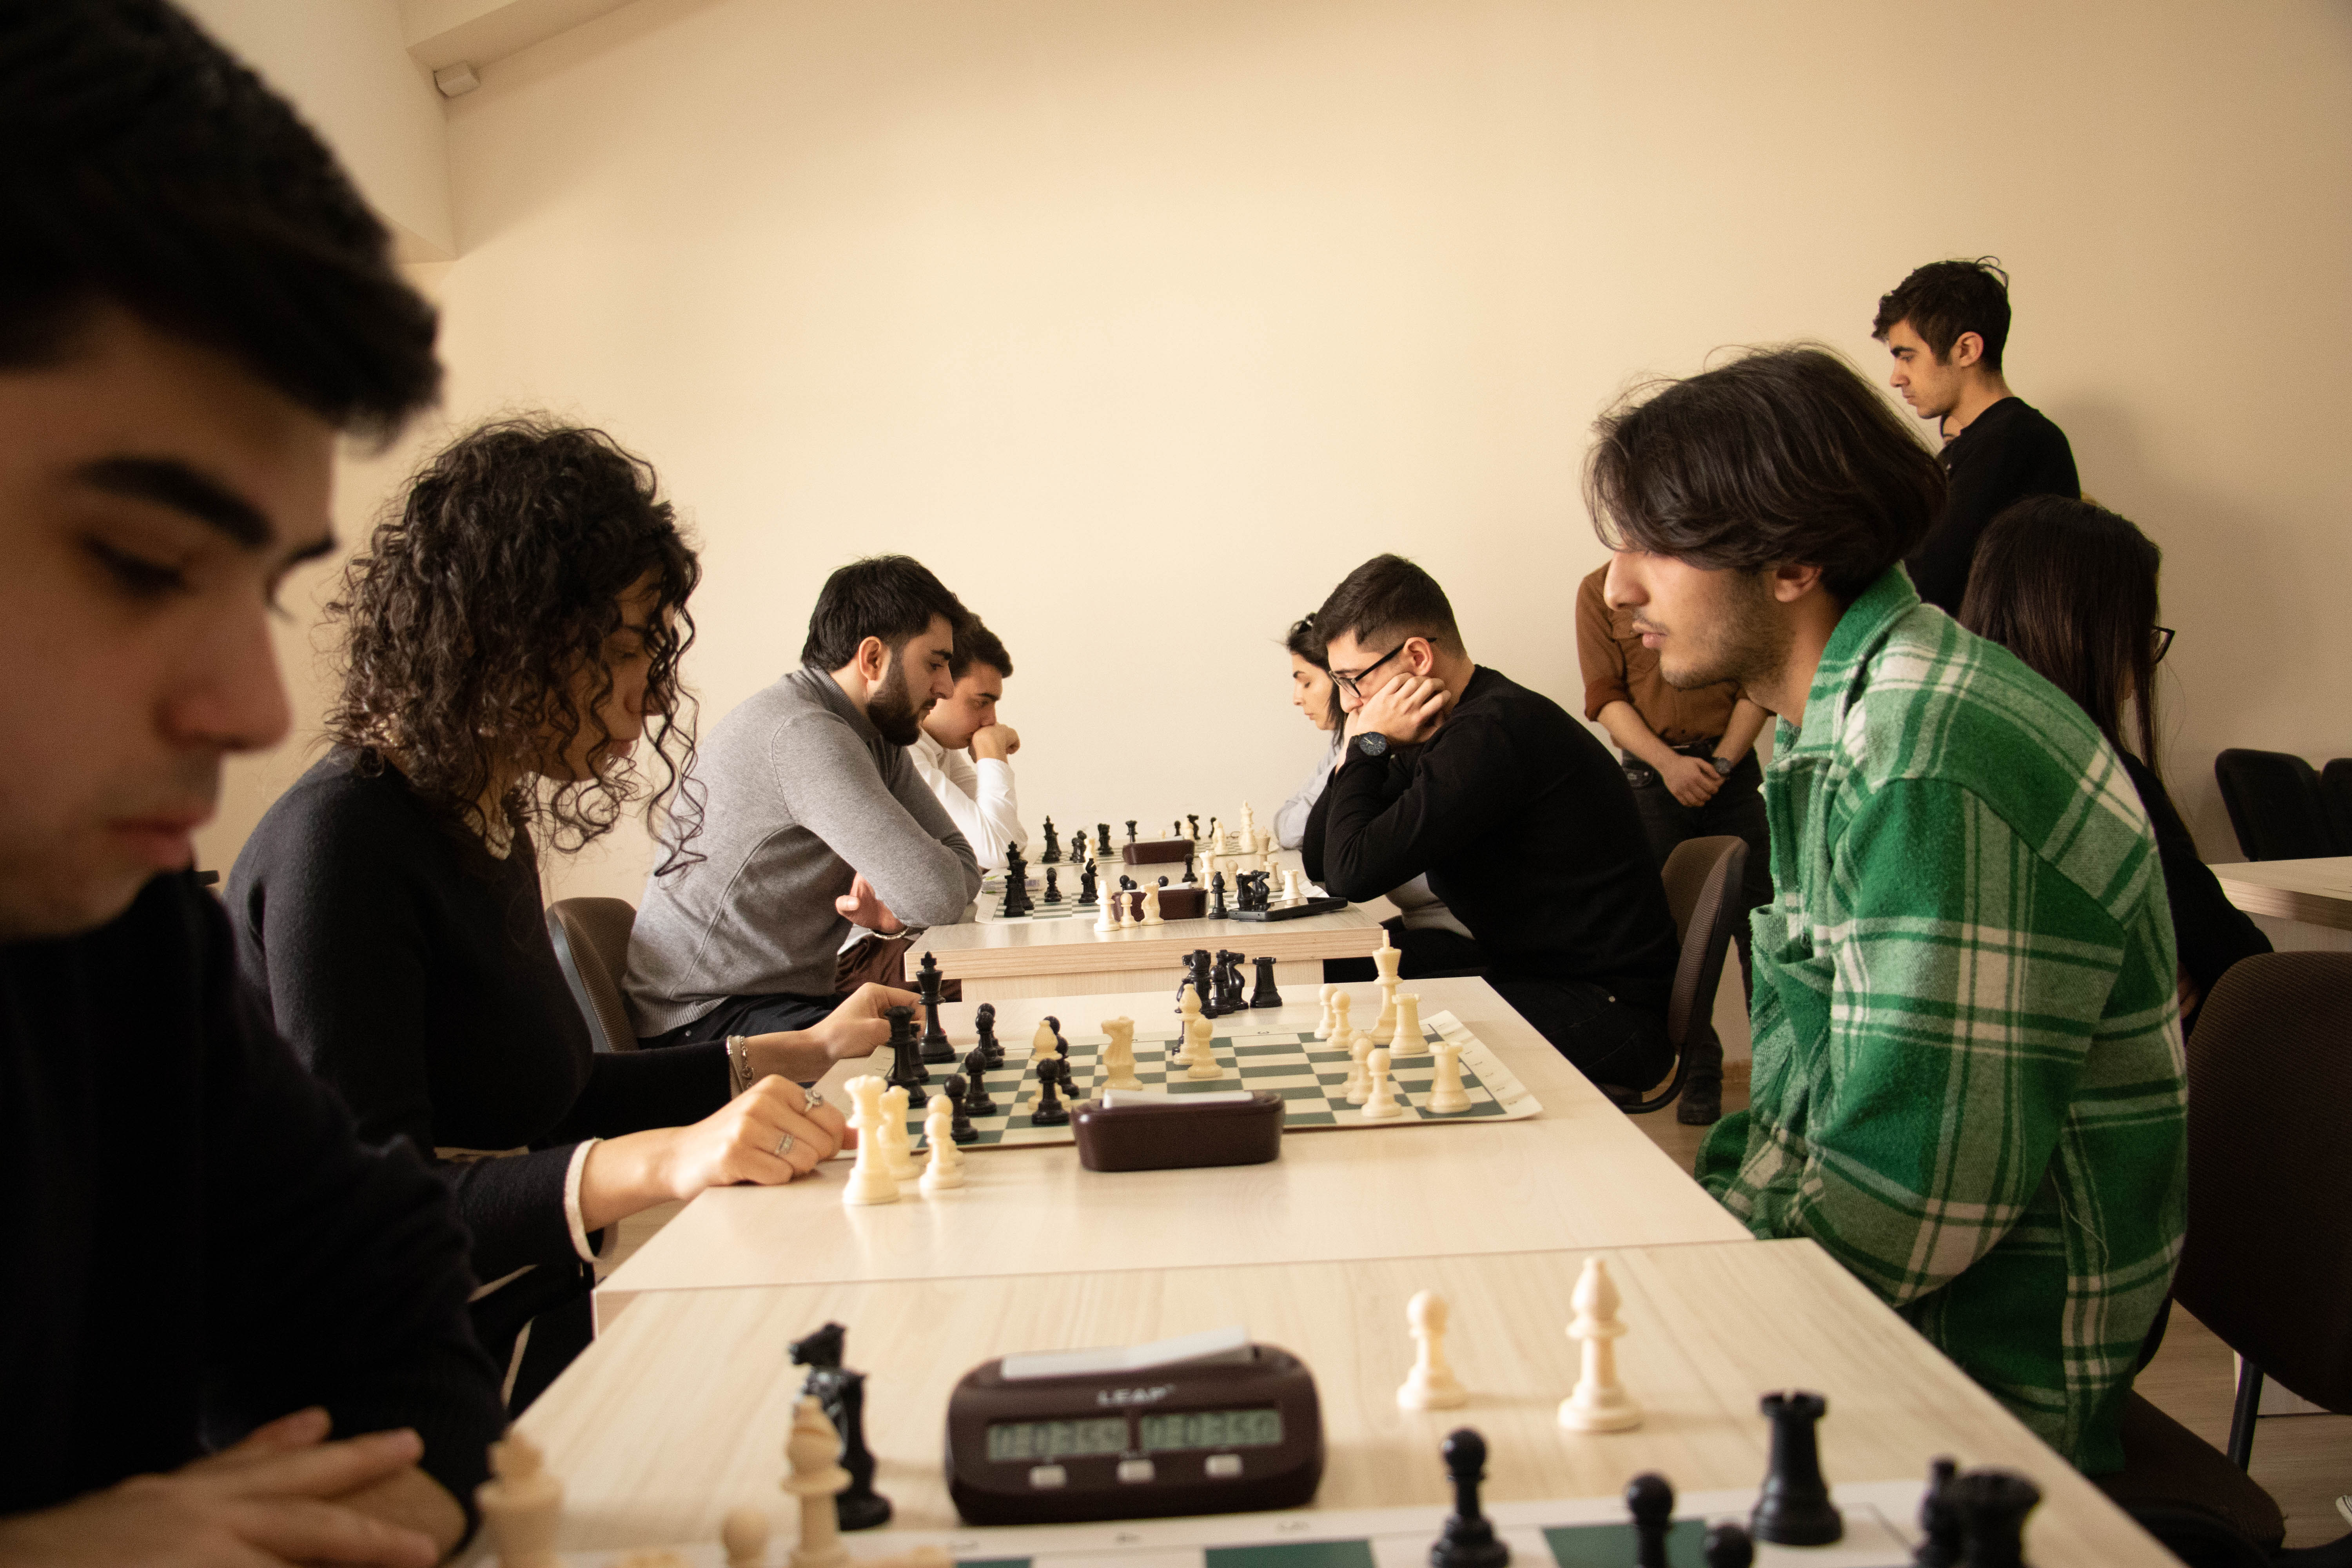 The intra-university chess tournament ended